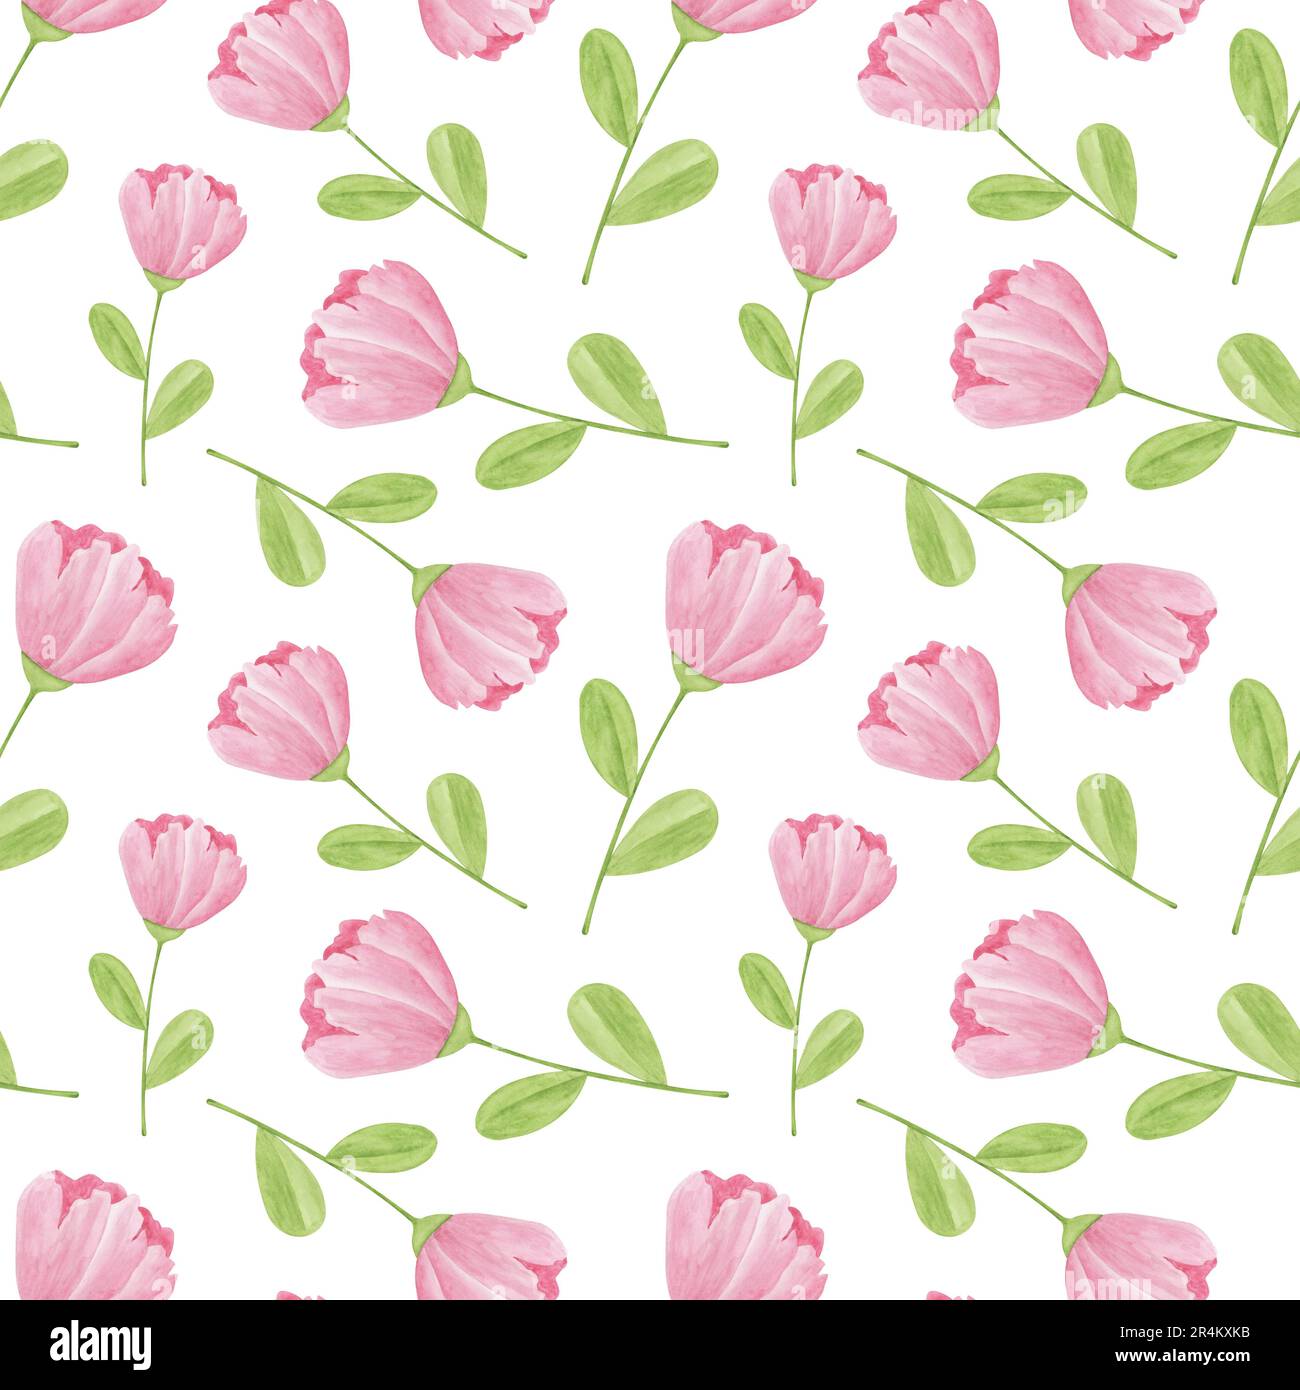 Seamless pattern with pink flowers on white background. Watercolor